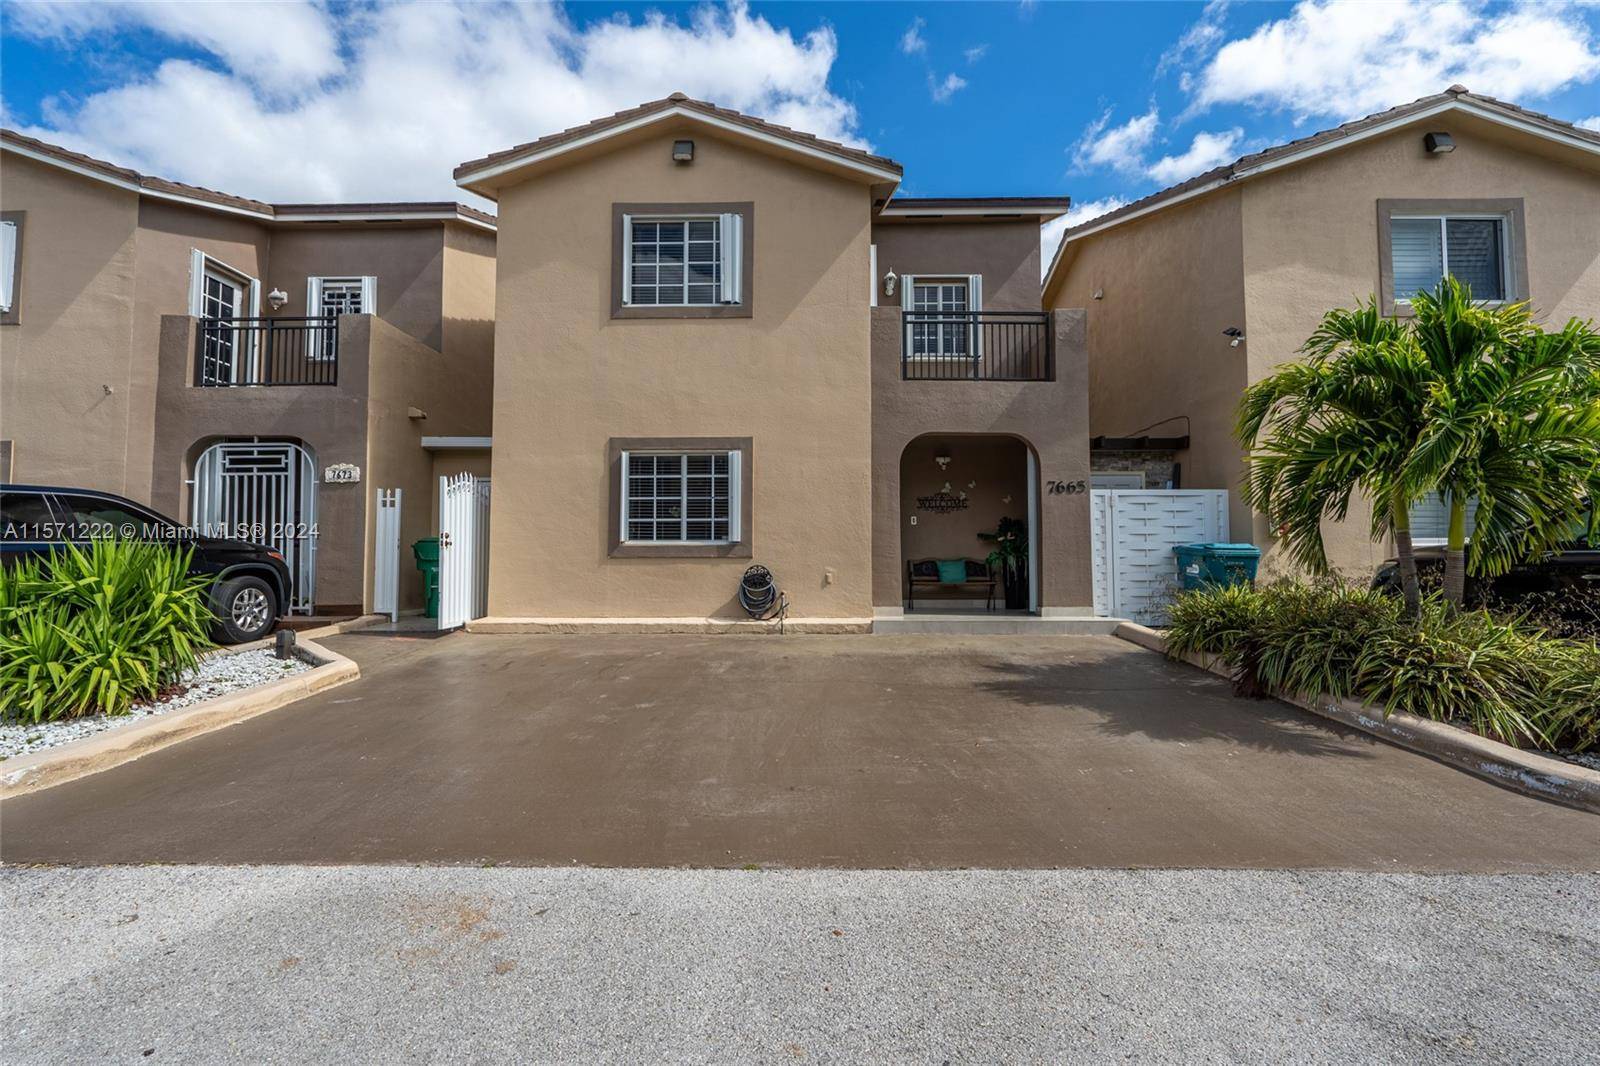 Stunning two story townhome in Hialeah offers a perfect blend of modern updates and convenience.